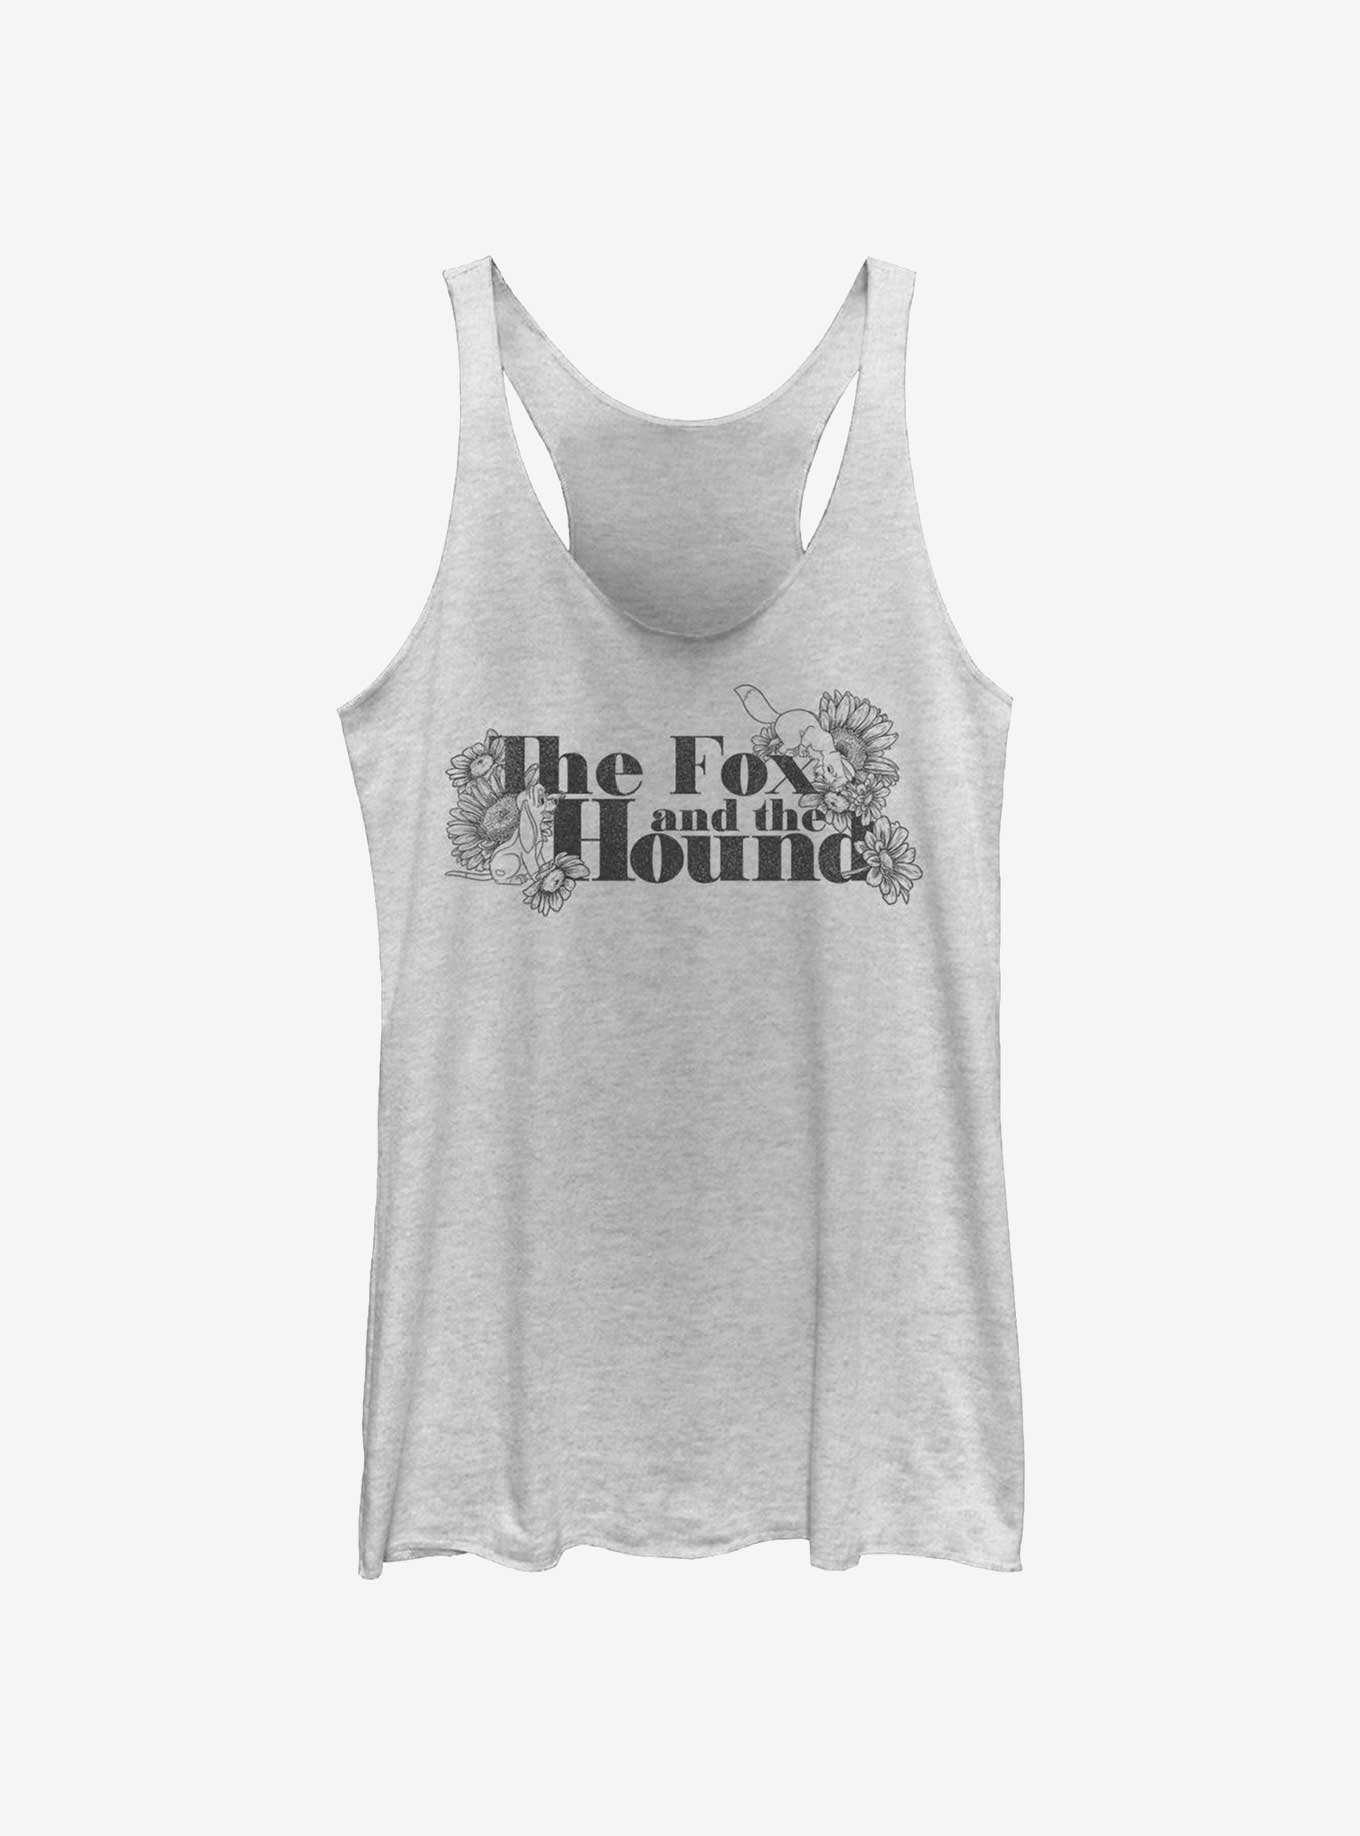 Disney The Fox and the Hound Floral Logo Girls Tank, , hi-res